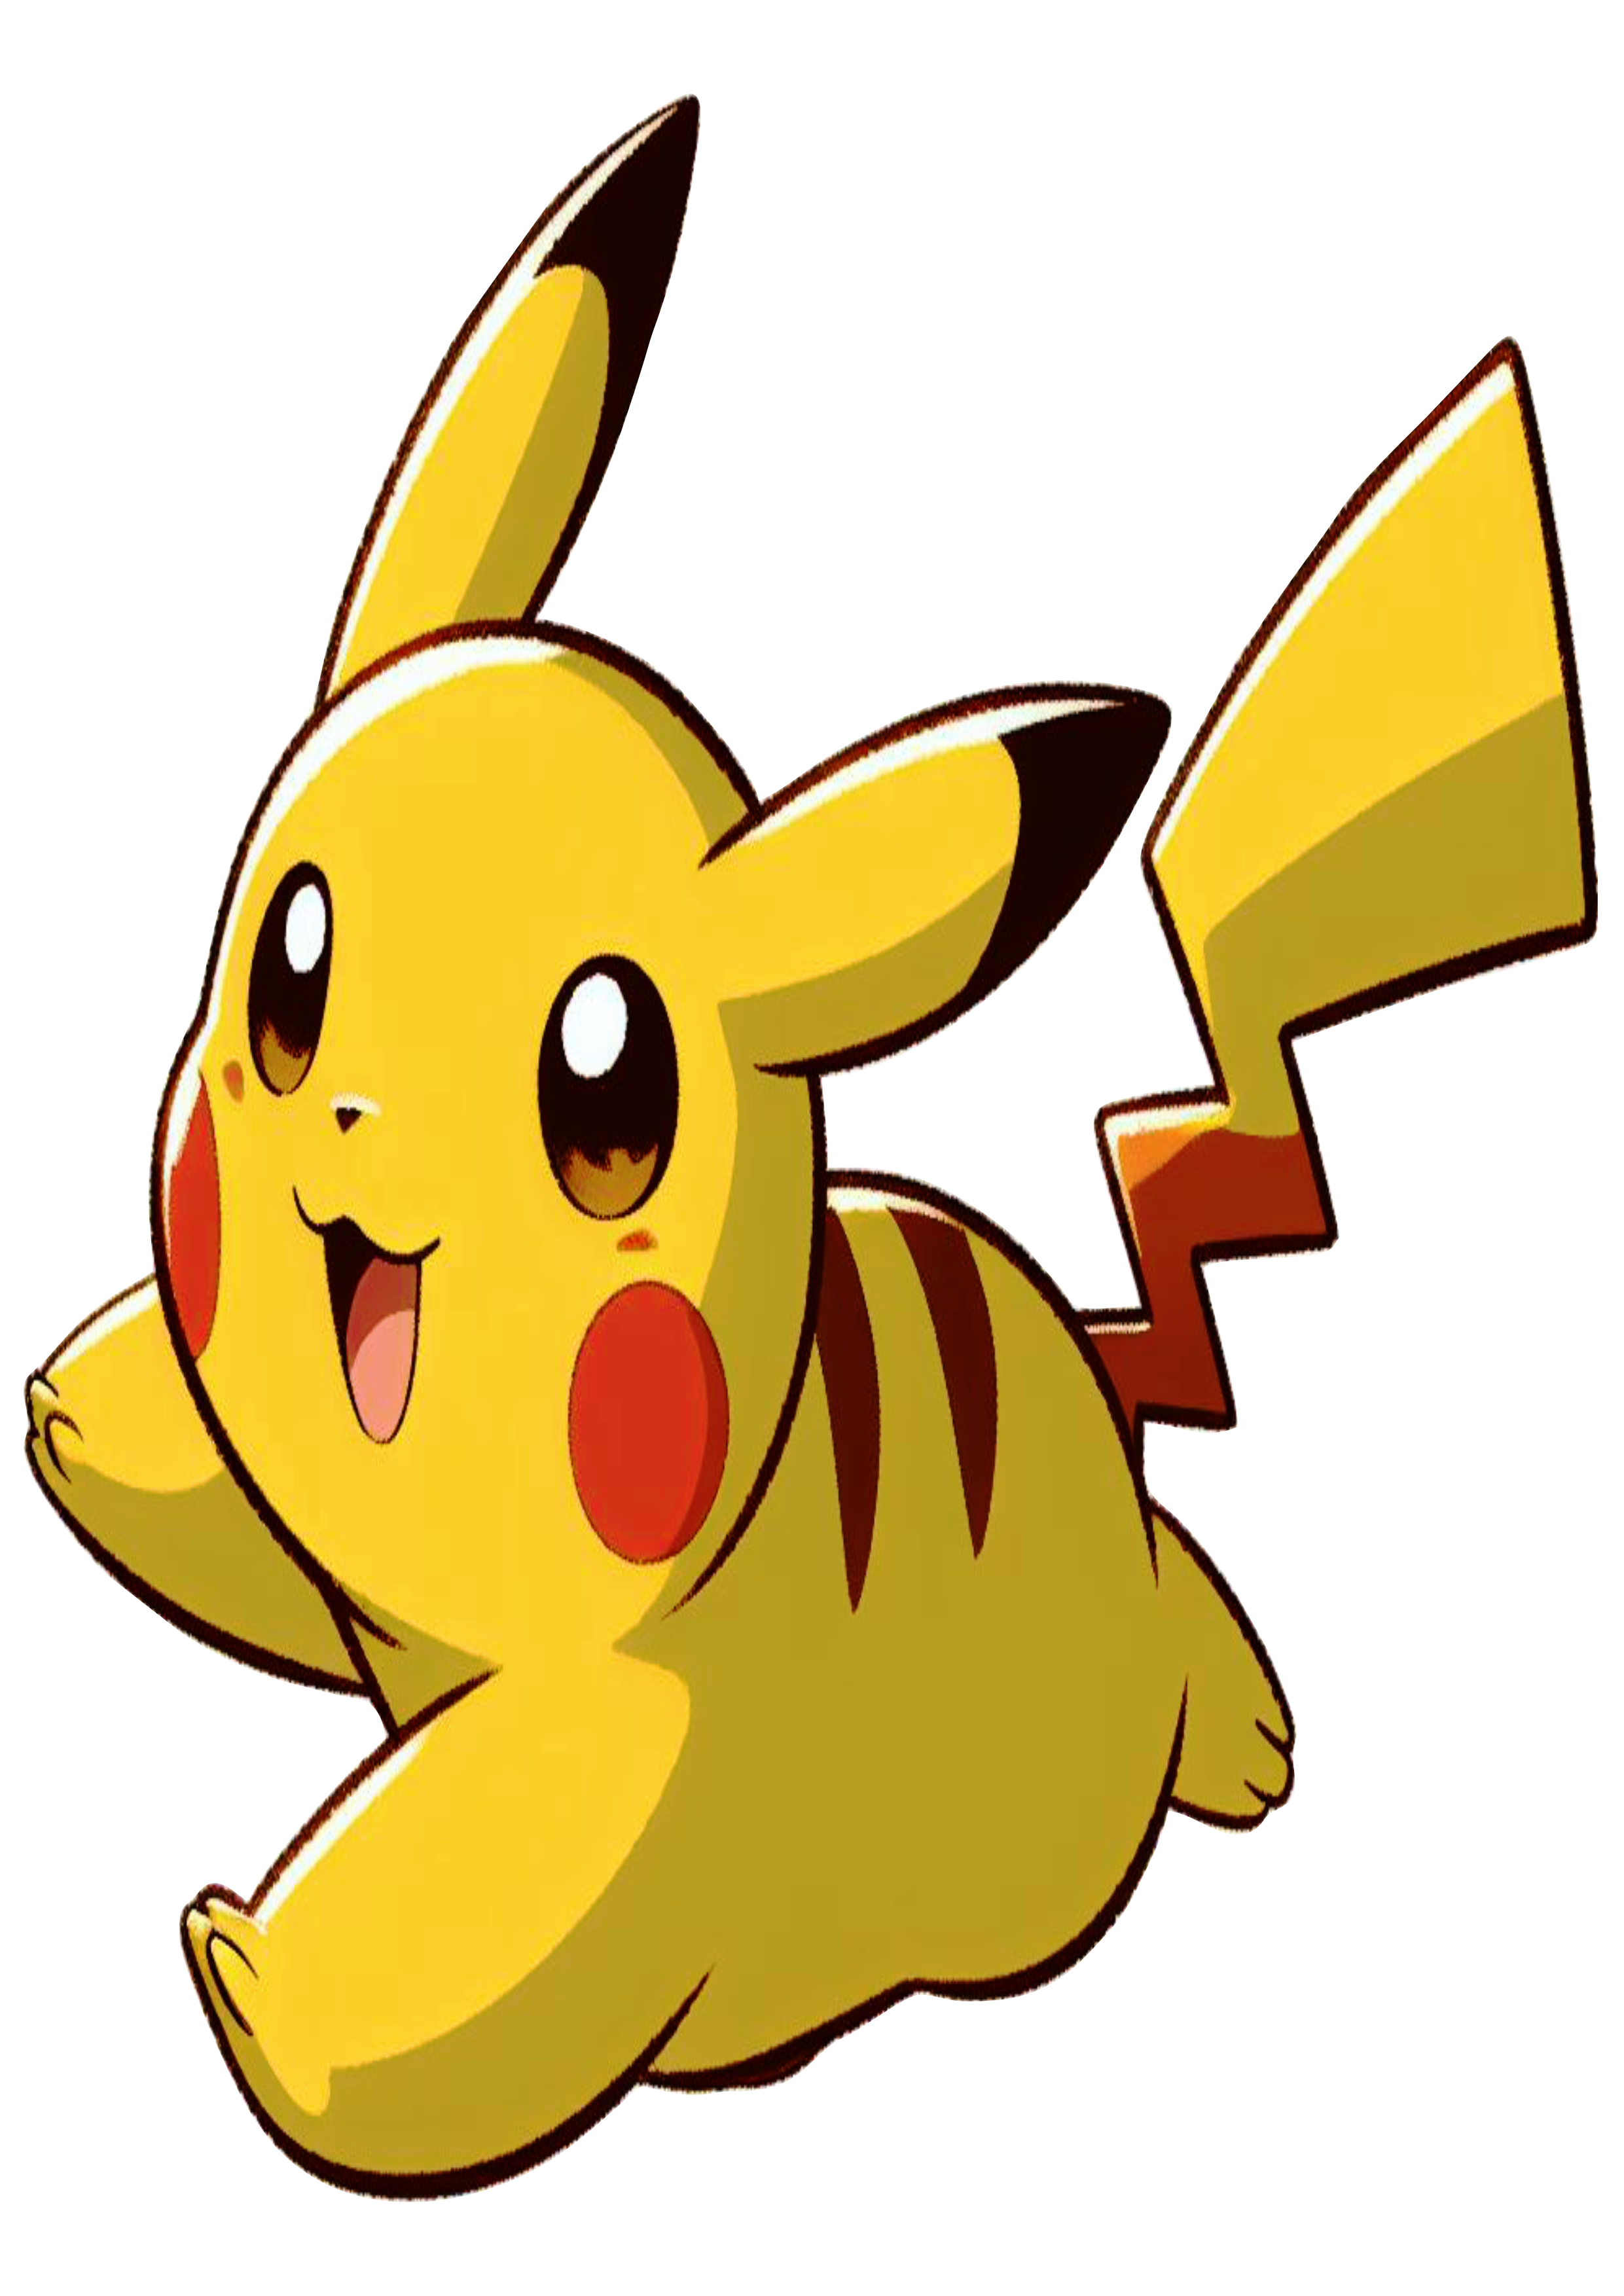 Pokemon png Pikachu anime transparent background colorful drawing clipart